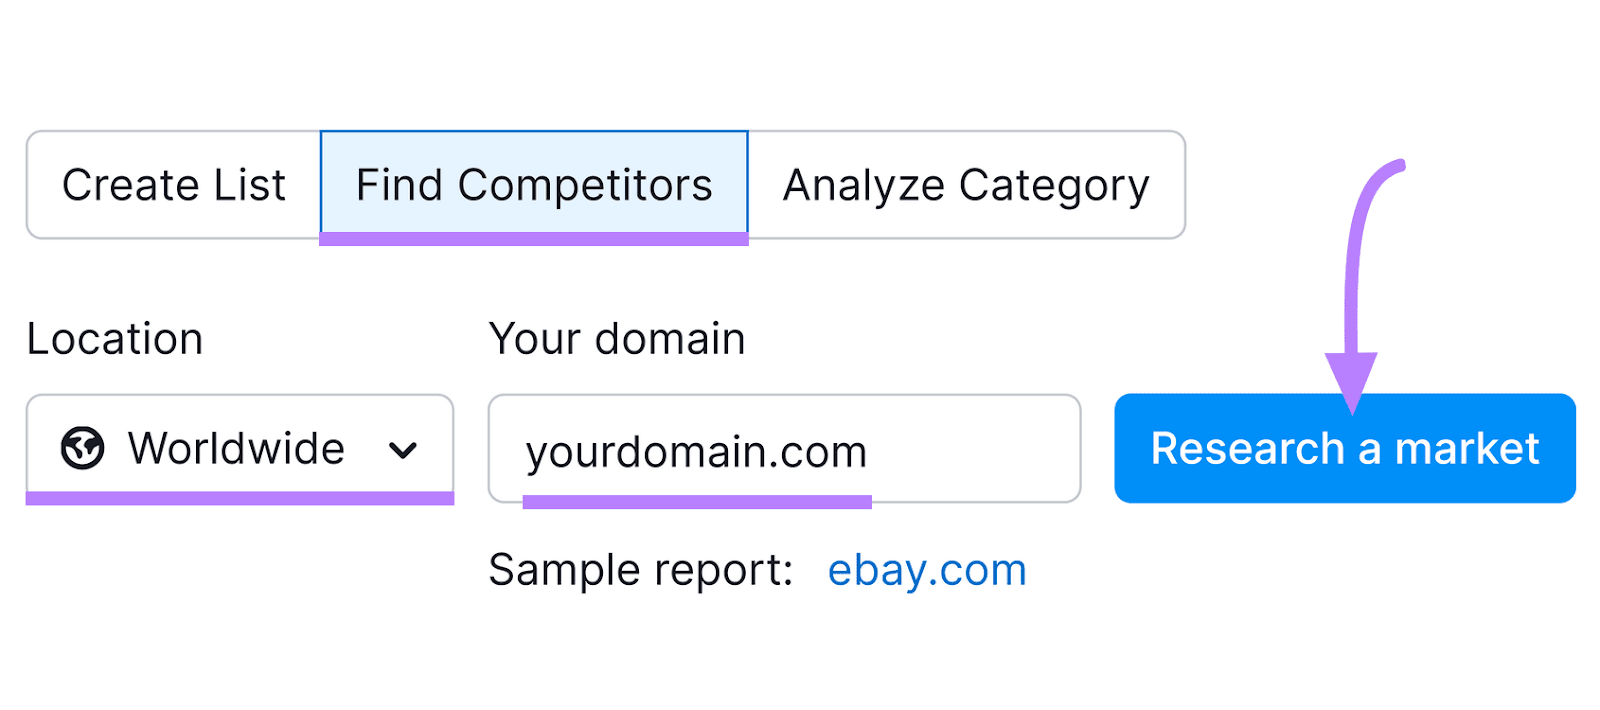 "Find Competitors" worldwide options selected in Market Explorer tool